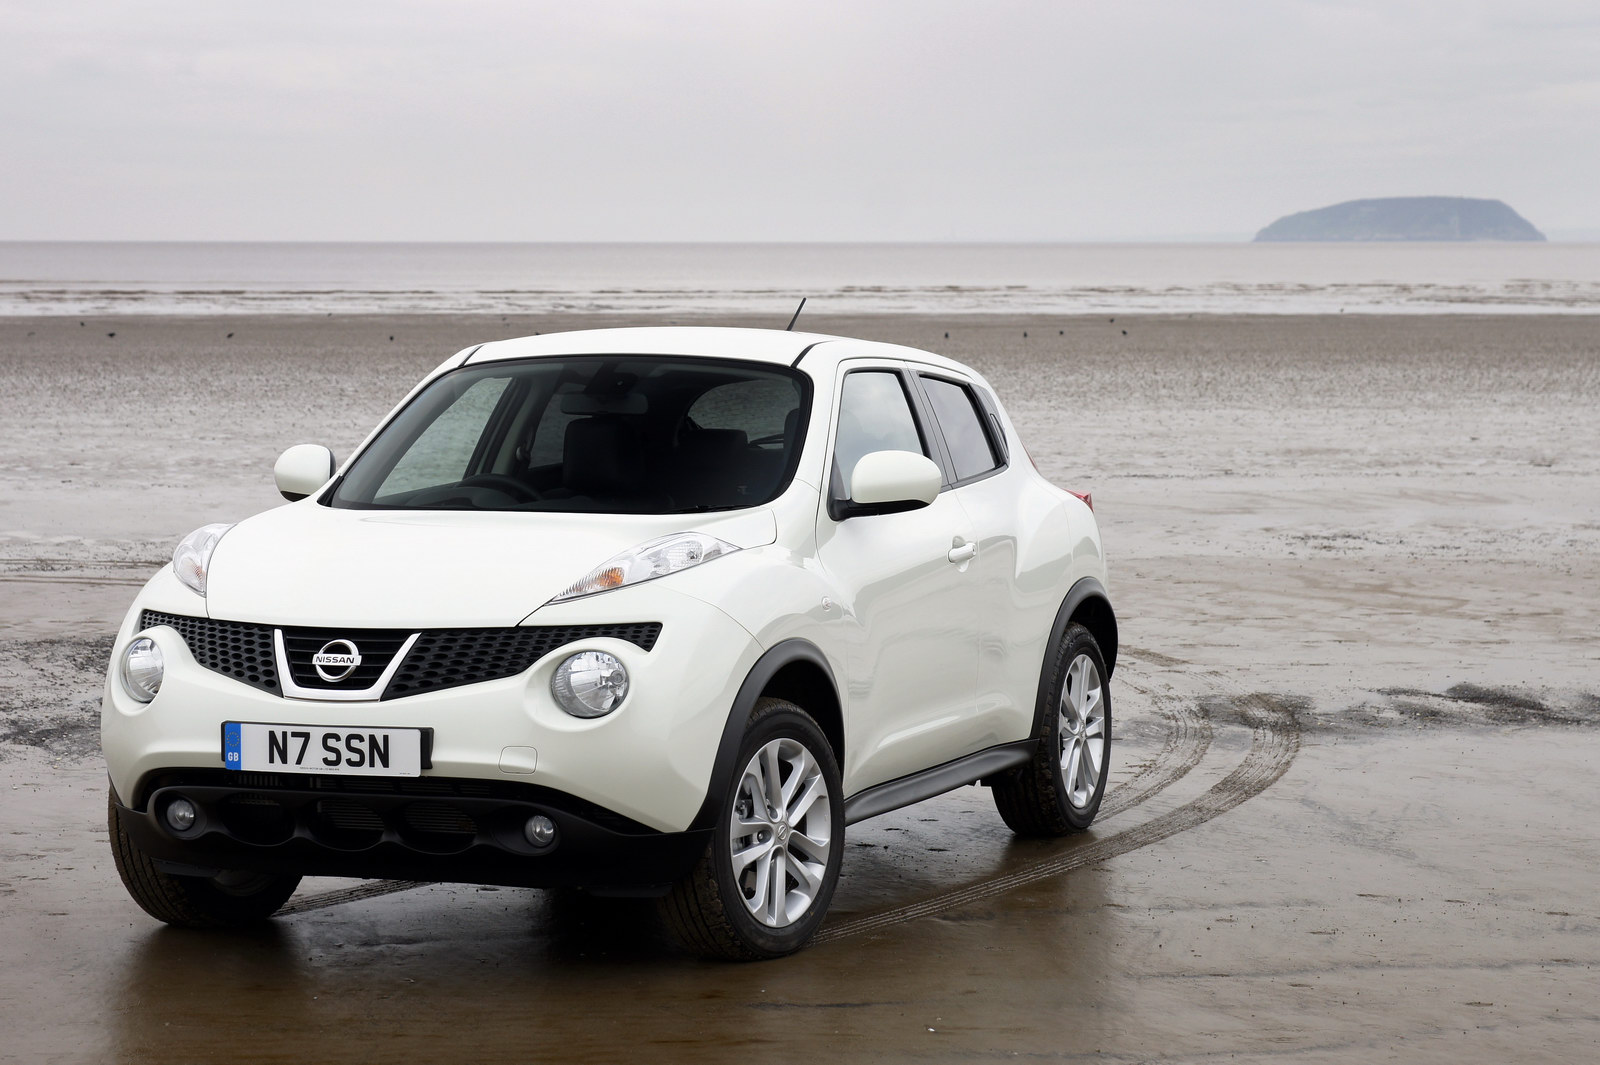 Nissan Introduces 2012 Juke with Improved Fuel Economy in Europe | Carscoops